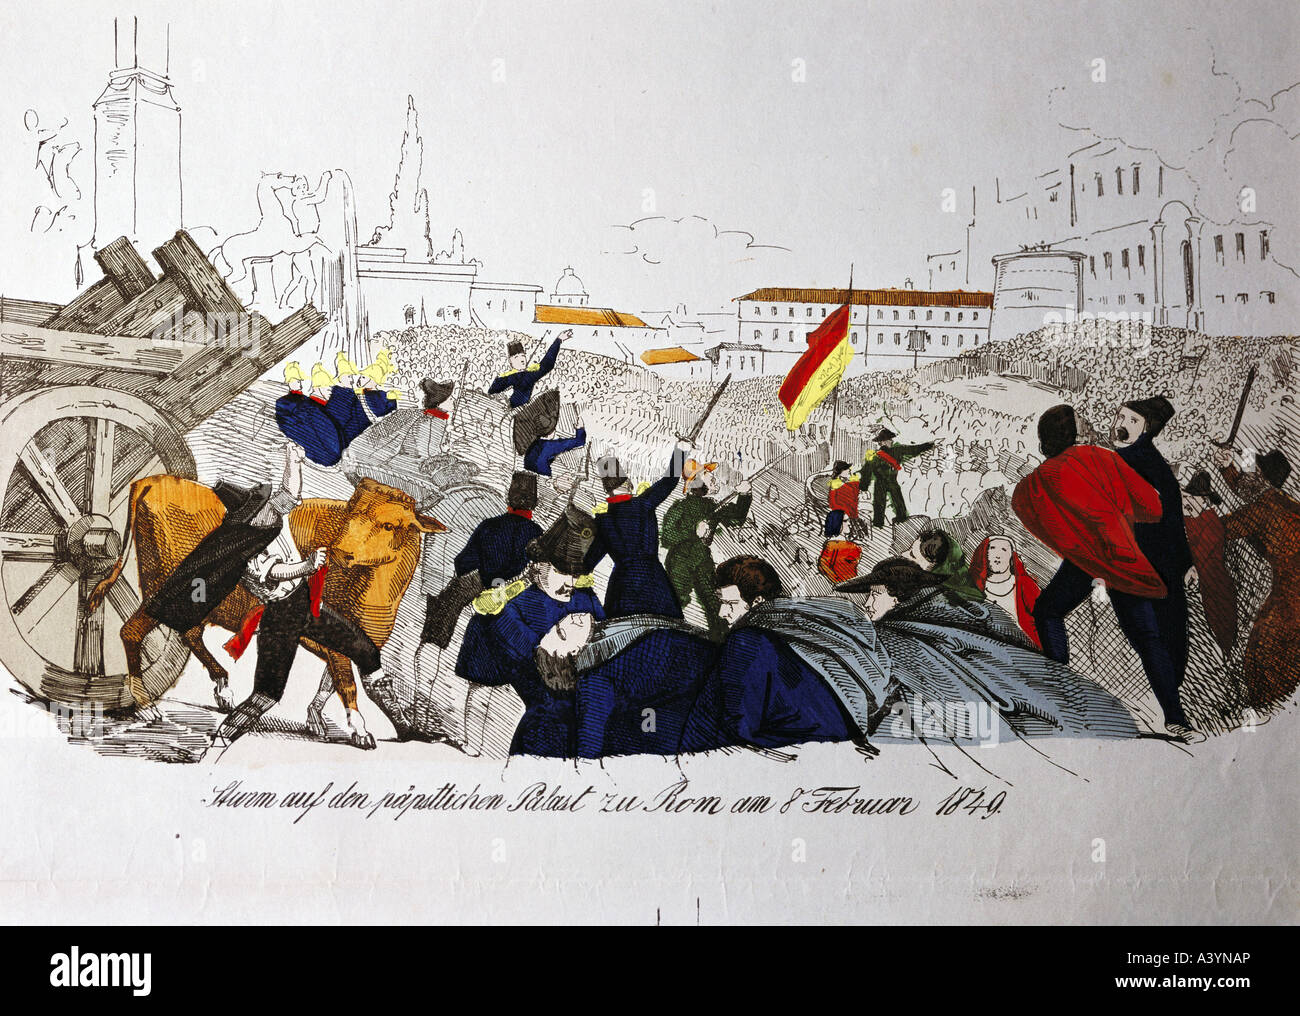 events, Revolutionen 1848 - 1849, Italy, Rome, storm at Papal palace, 8.2.1849, colour lithograph, second half 19th century, private collection, historic, historical, Europe, Papal States, street fight, fight, fighting, revolutionsaries, insurgence, insurgency, people, Stock Photo